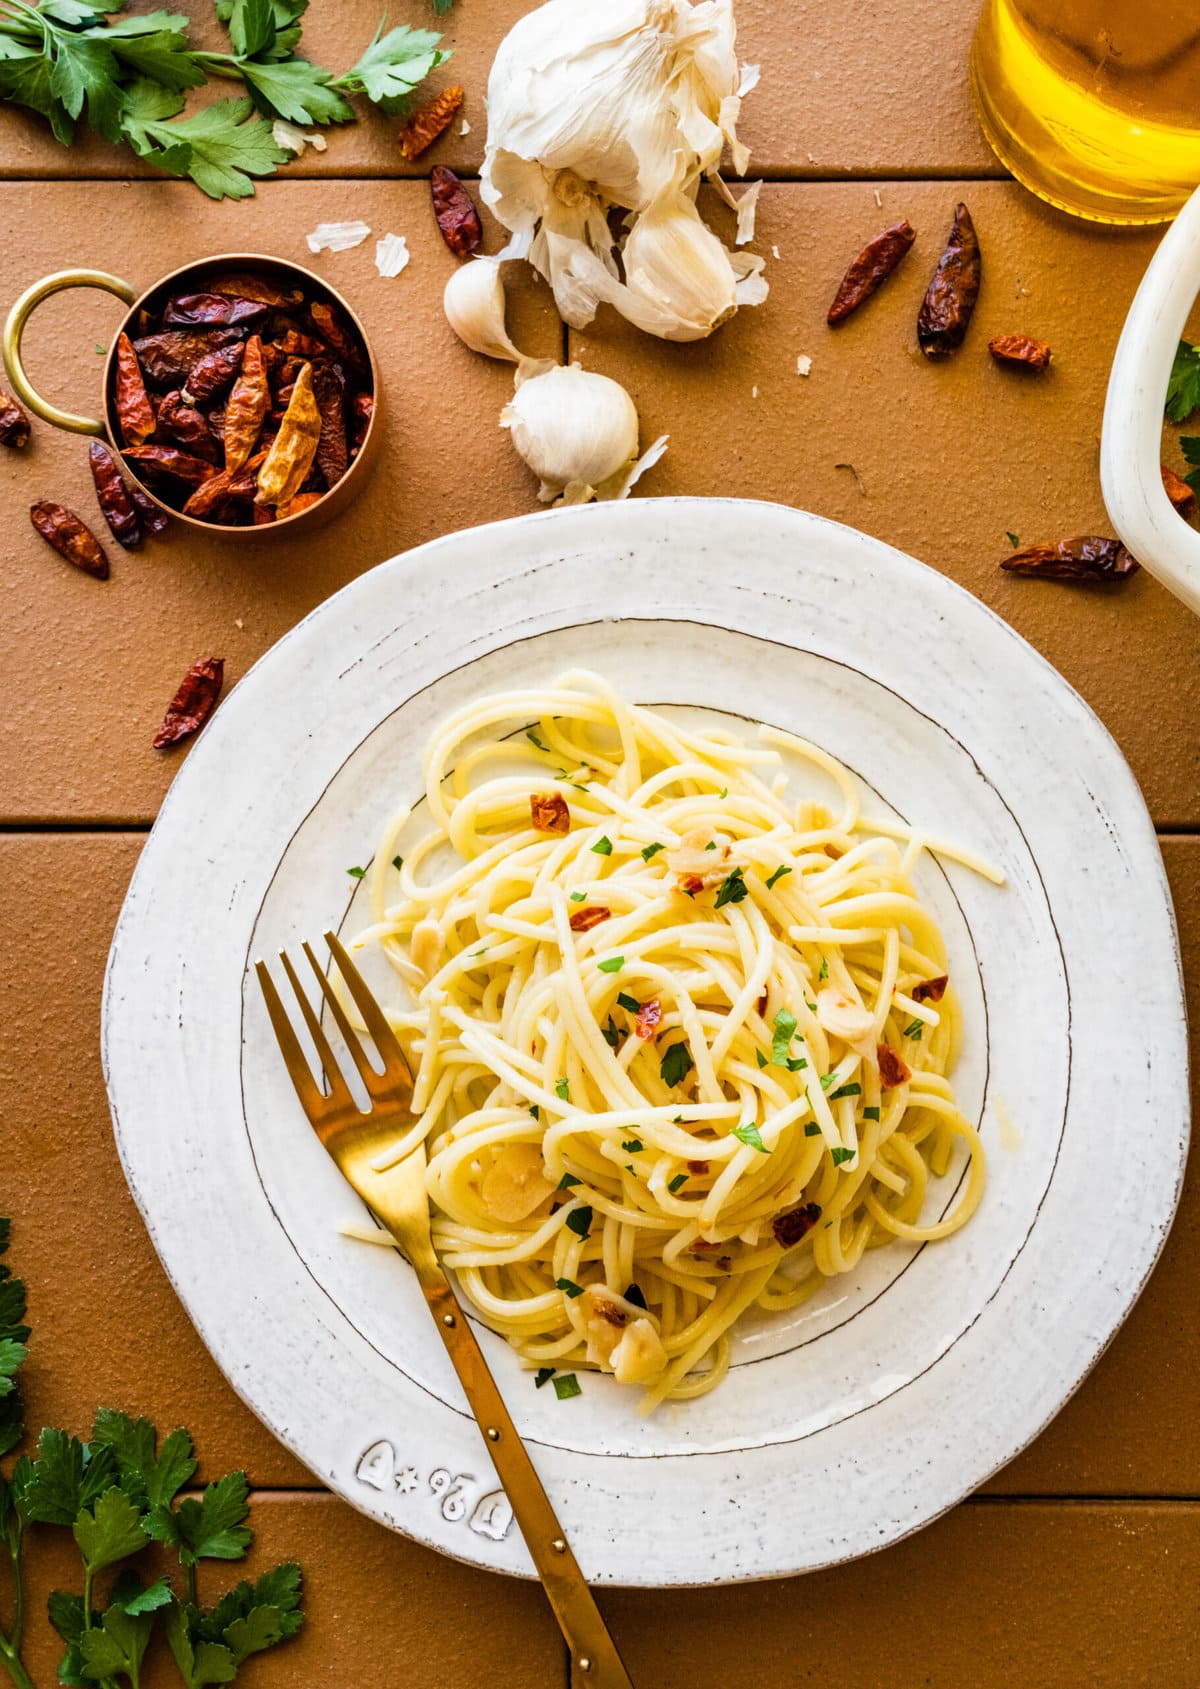 Aglio e olio pasta recipe on a plate ready to eat. garlic and dried red peppers on background